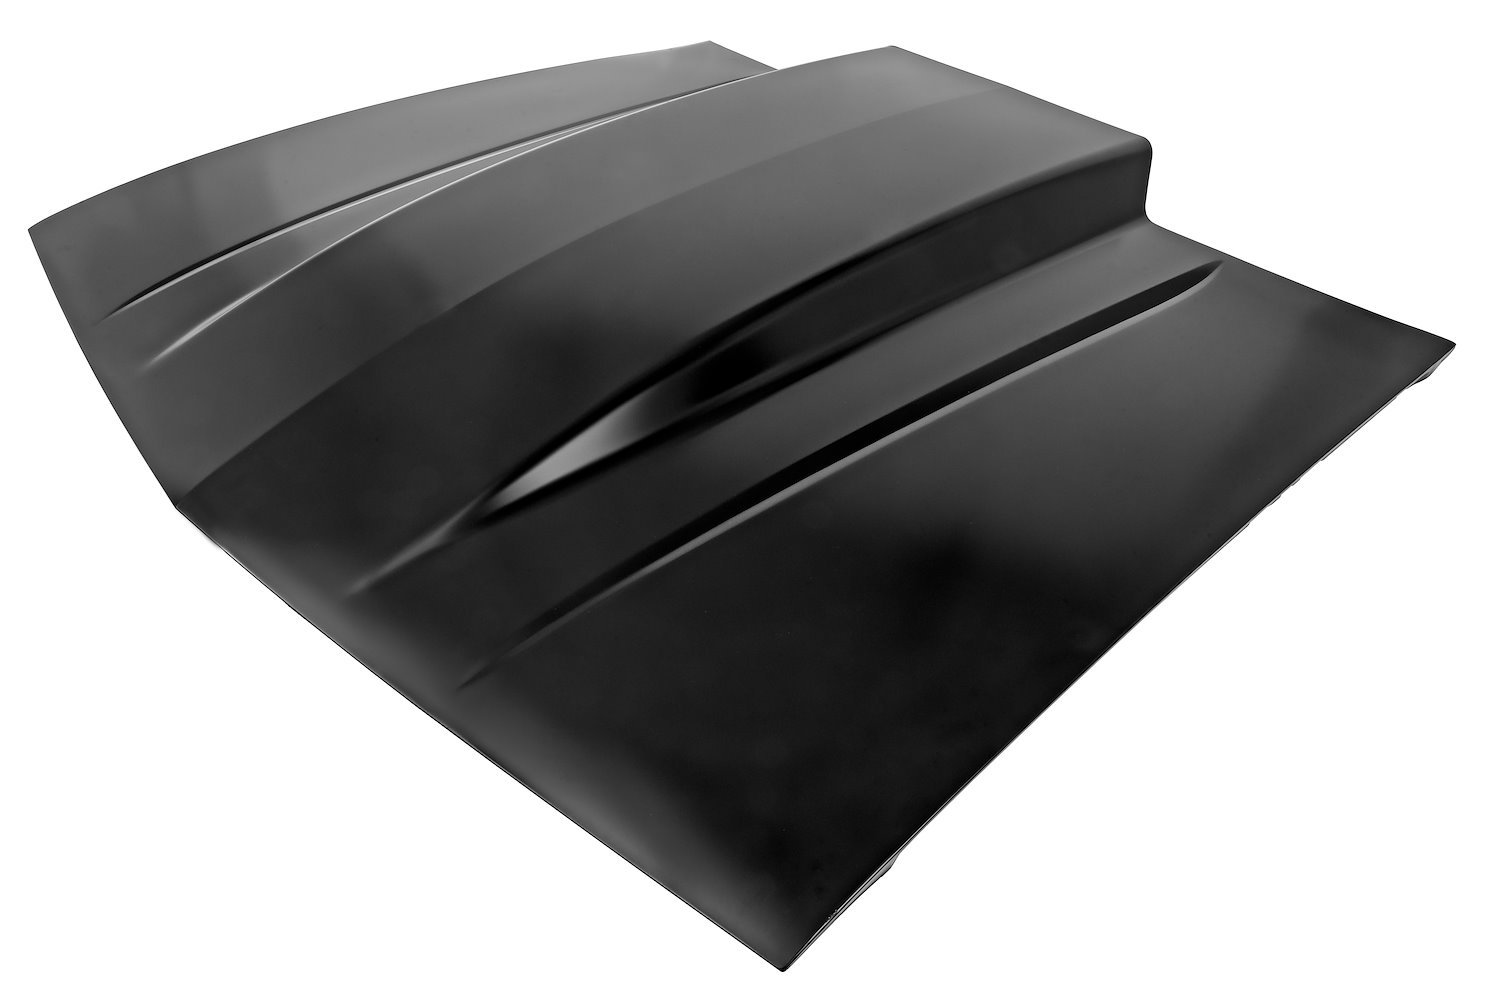 Steel Cowl Induction Hood for 1982-1992 Chevrolet Camaro [4 in. Cowl Induction Scoop]